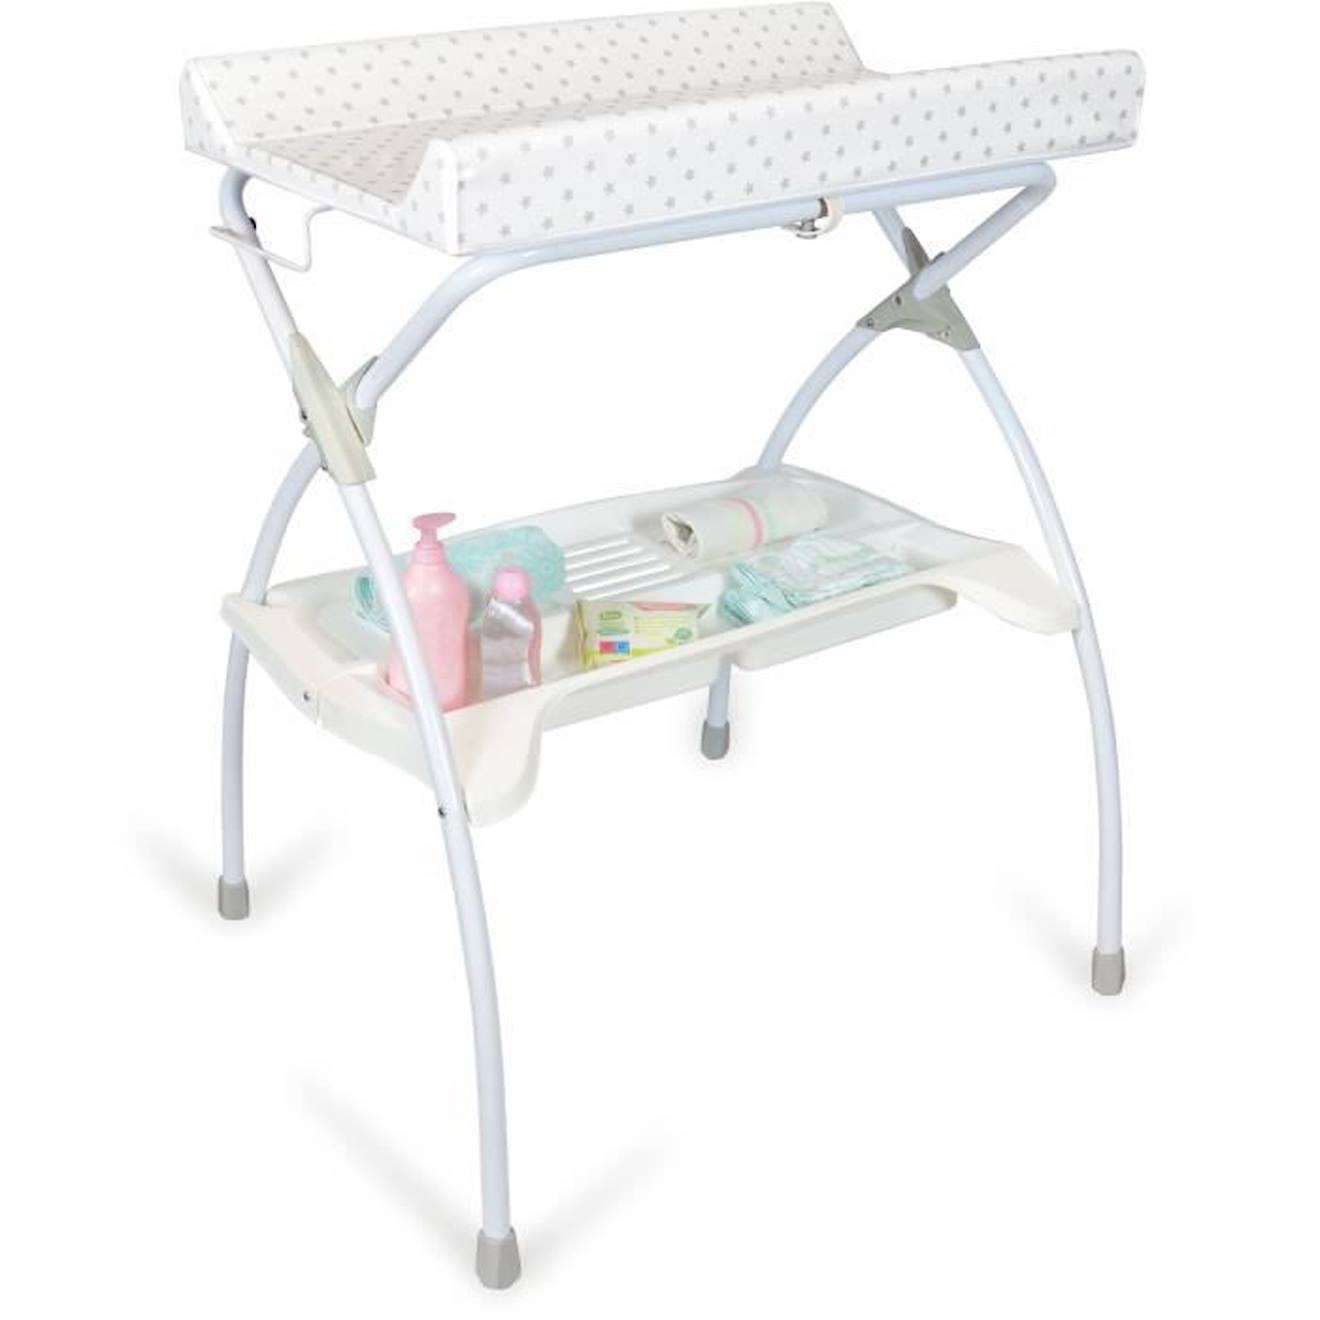 Table À Langer Moon - Babyland - Pvc - 80x68x98cm - Etoile Grise - Made In Italia Blanc